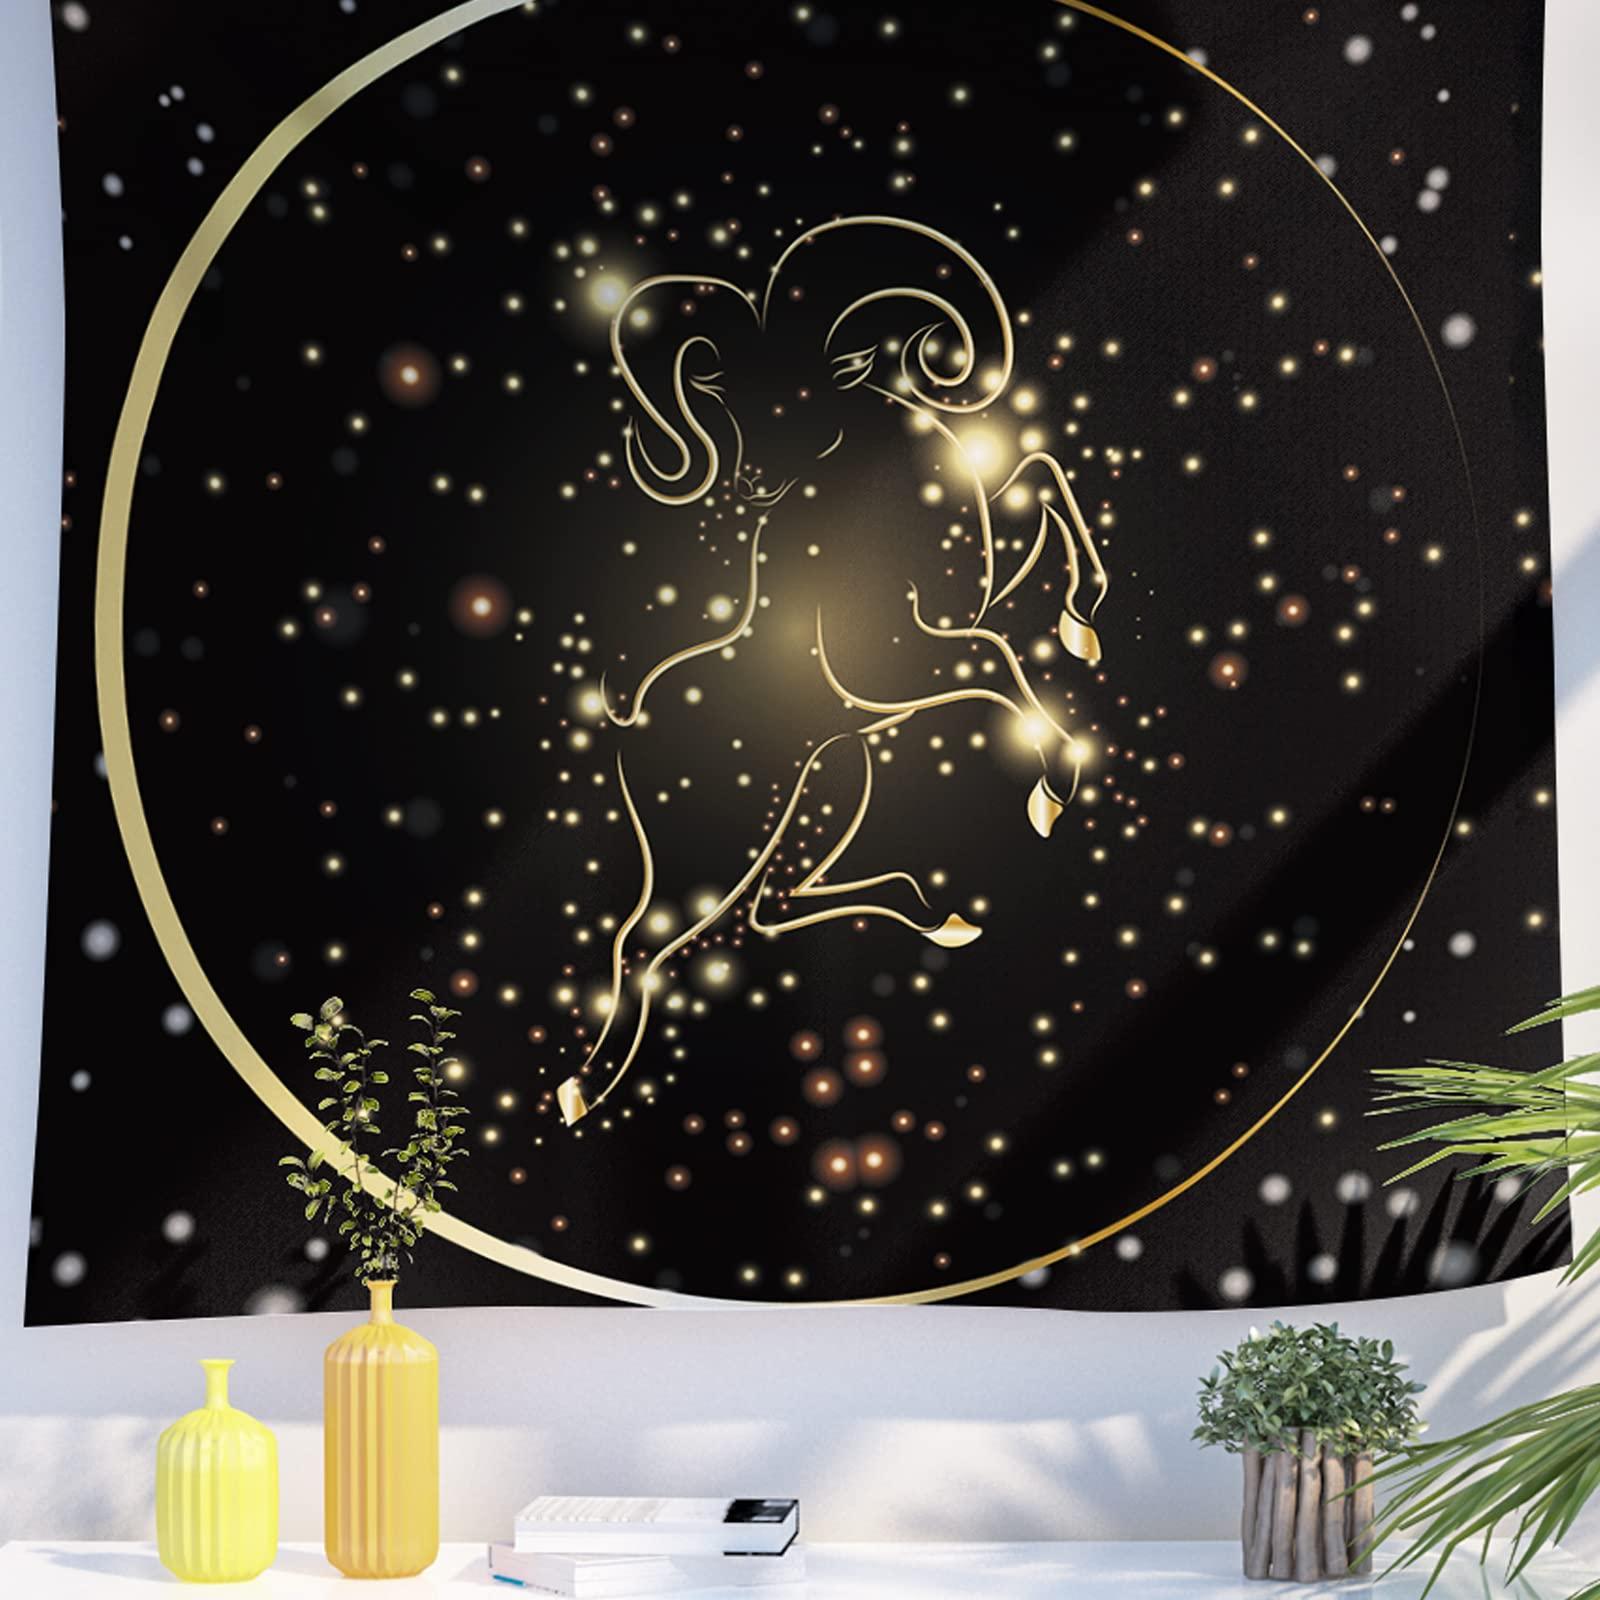 Berkin Arts Decor Tapestry for Wall Hanging Premium Polyester Fabric Backdrop Space Art Zodiac Sign Zodiac Libra Sign 51.2 x 59.1 Inch